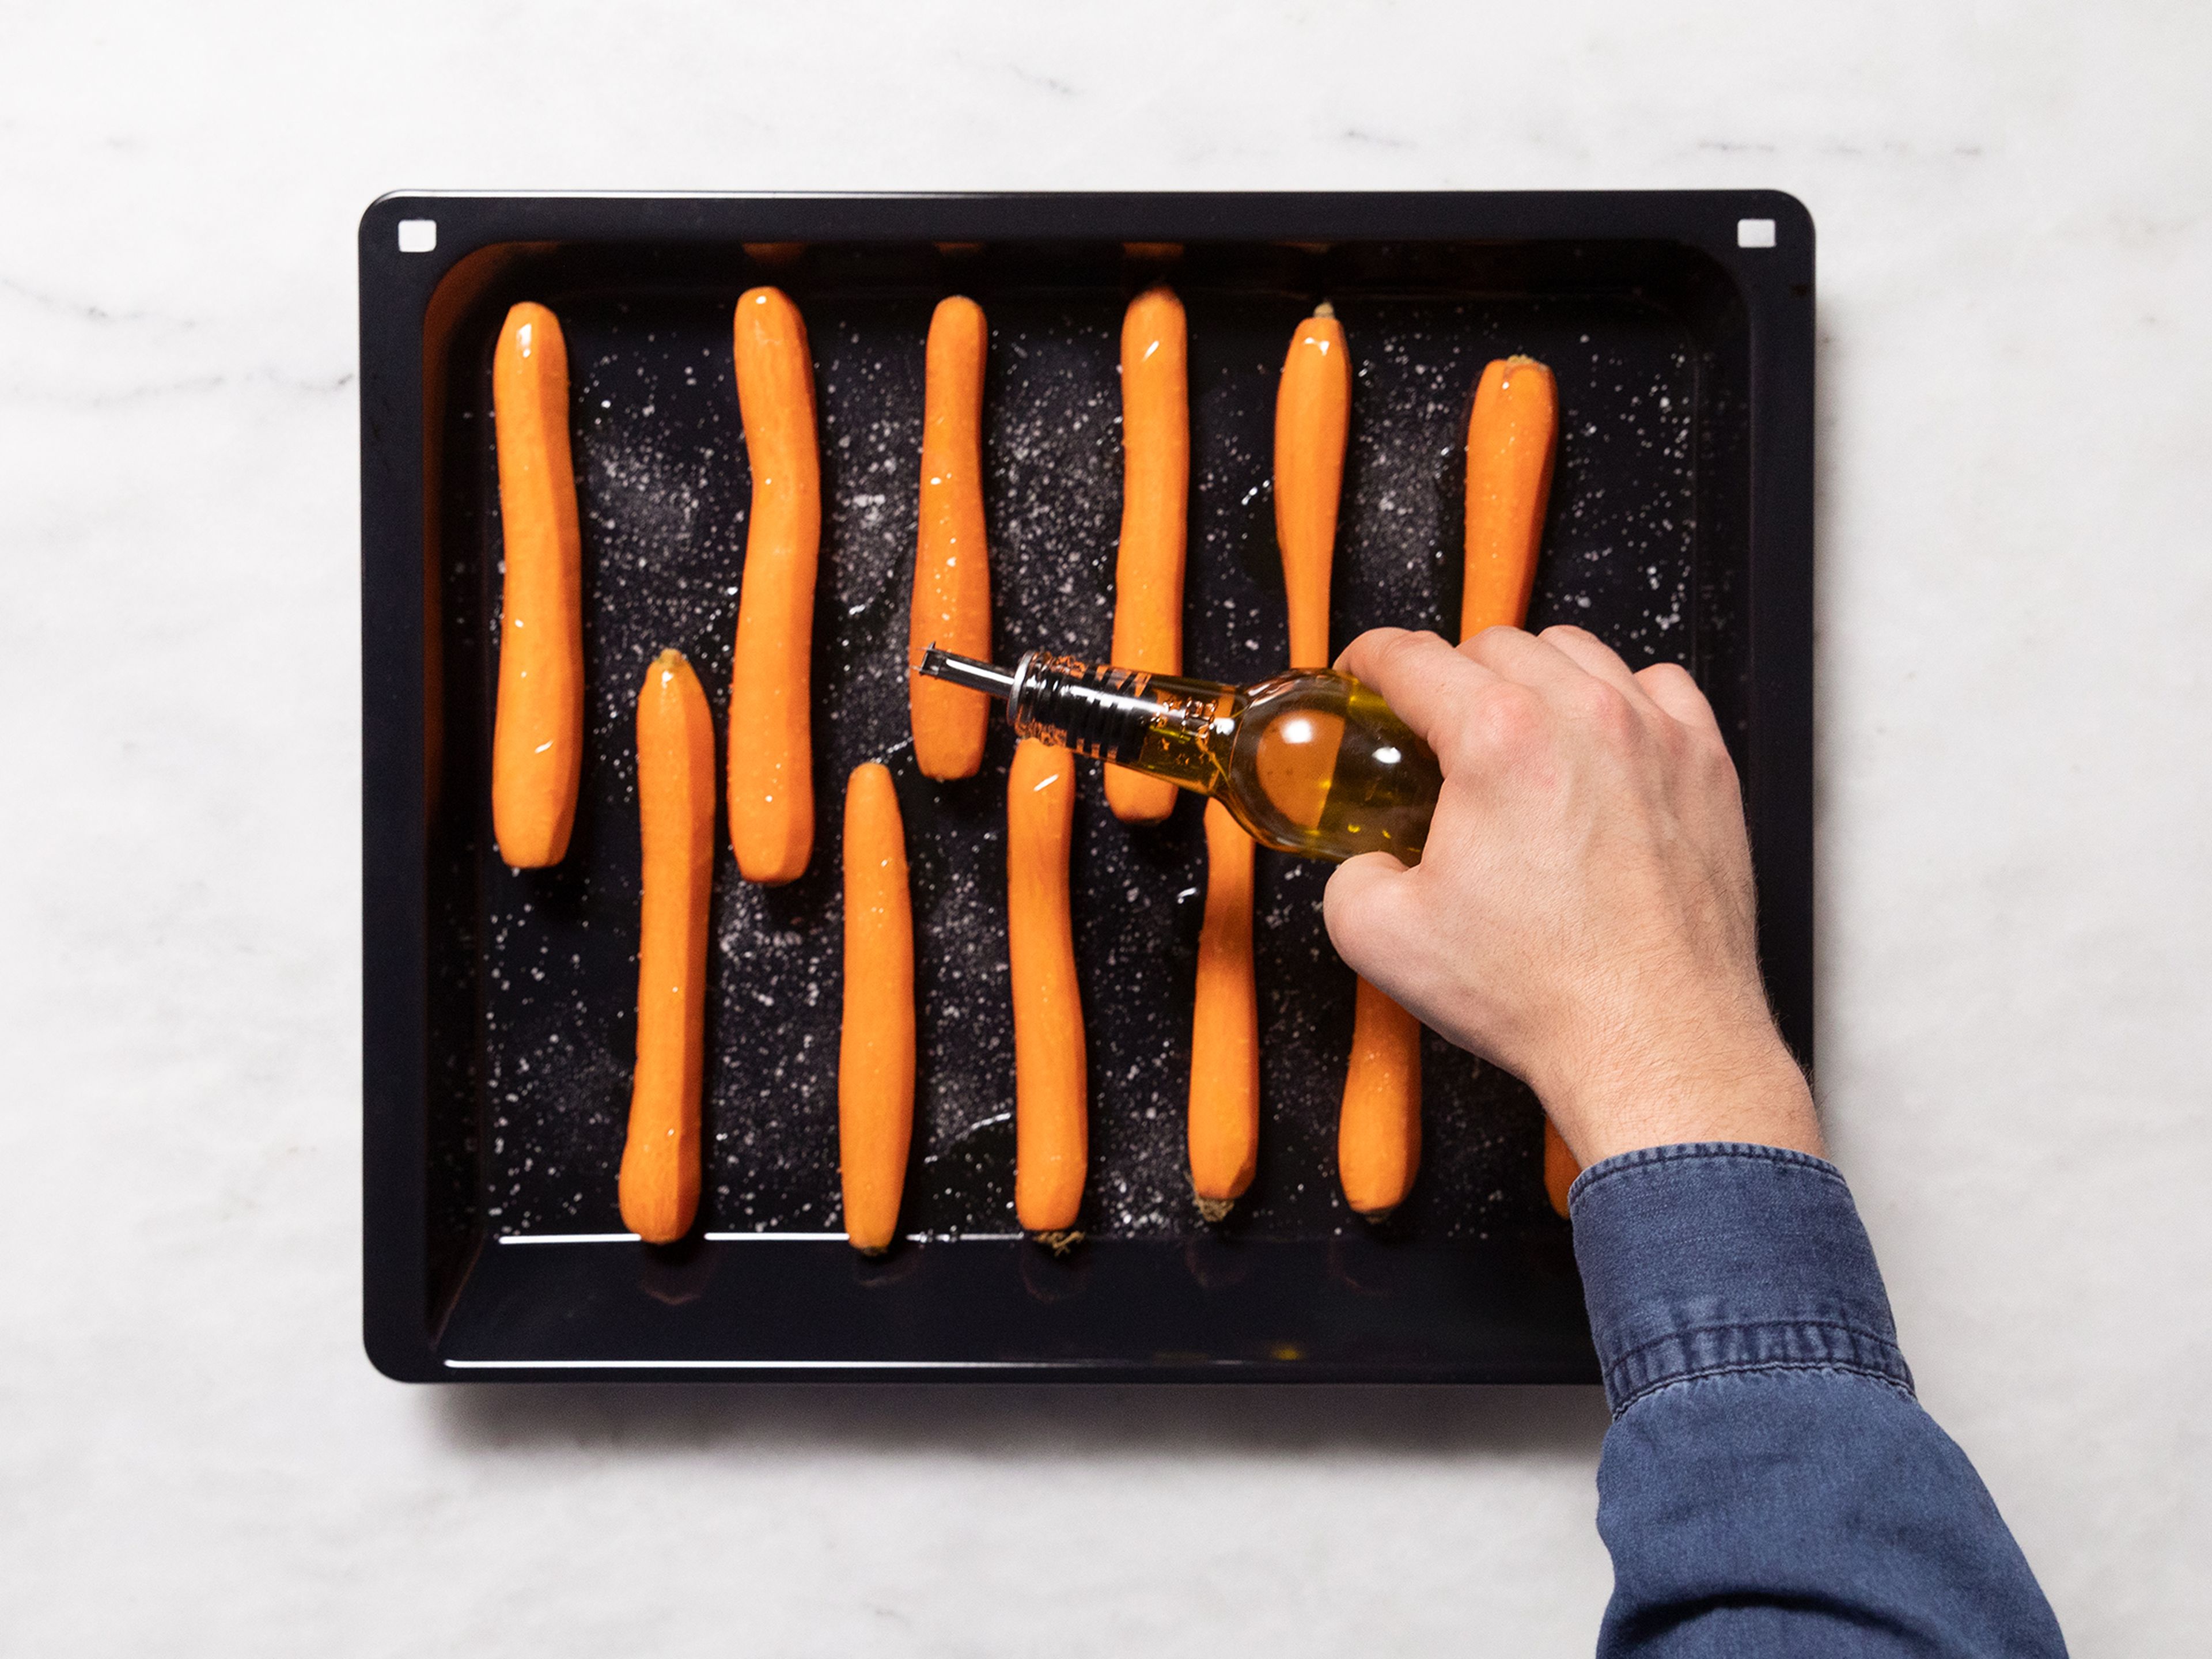 Preheat the oven at 180°C/350°F. Peel carrots and transfer onto a baking sheet. Drizzle with some olive oil, season with salt, and roast for approx. 45 min.